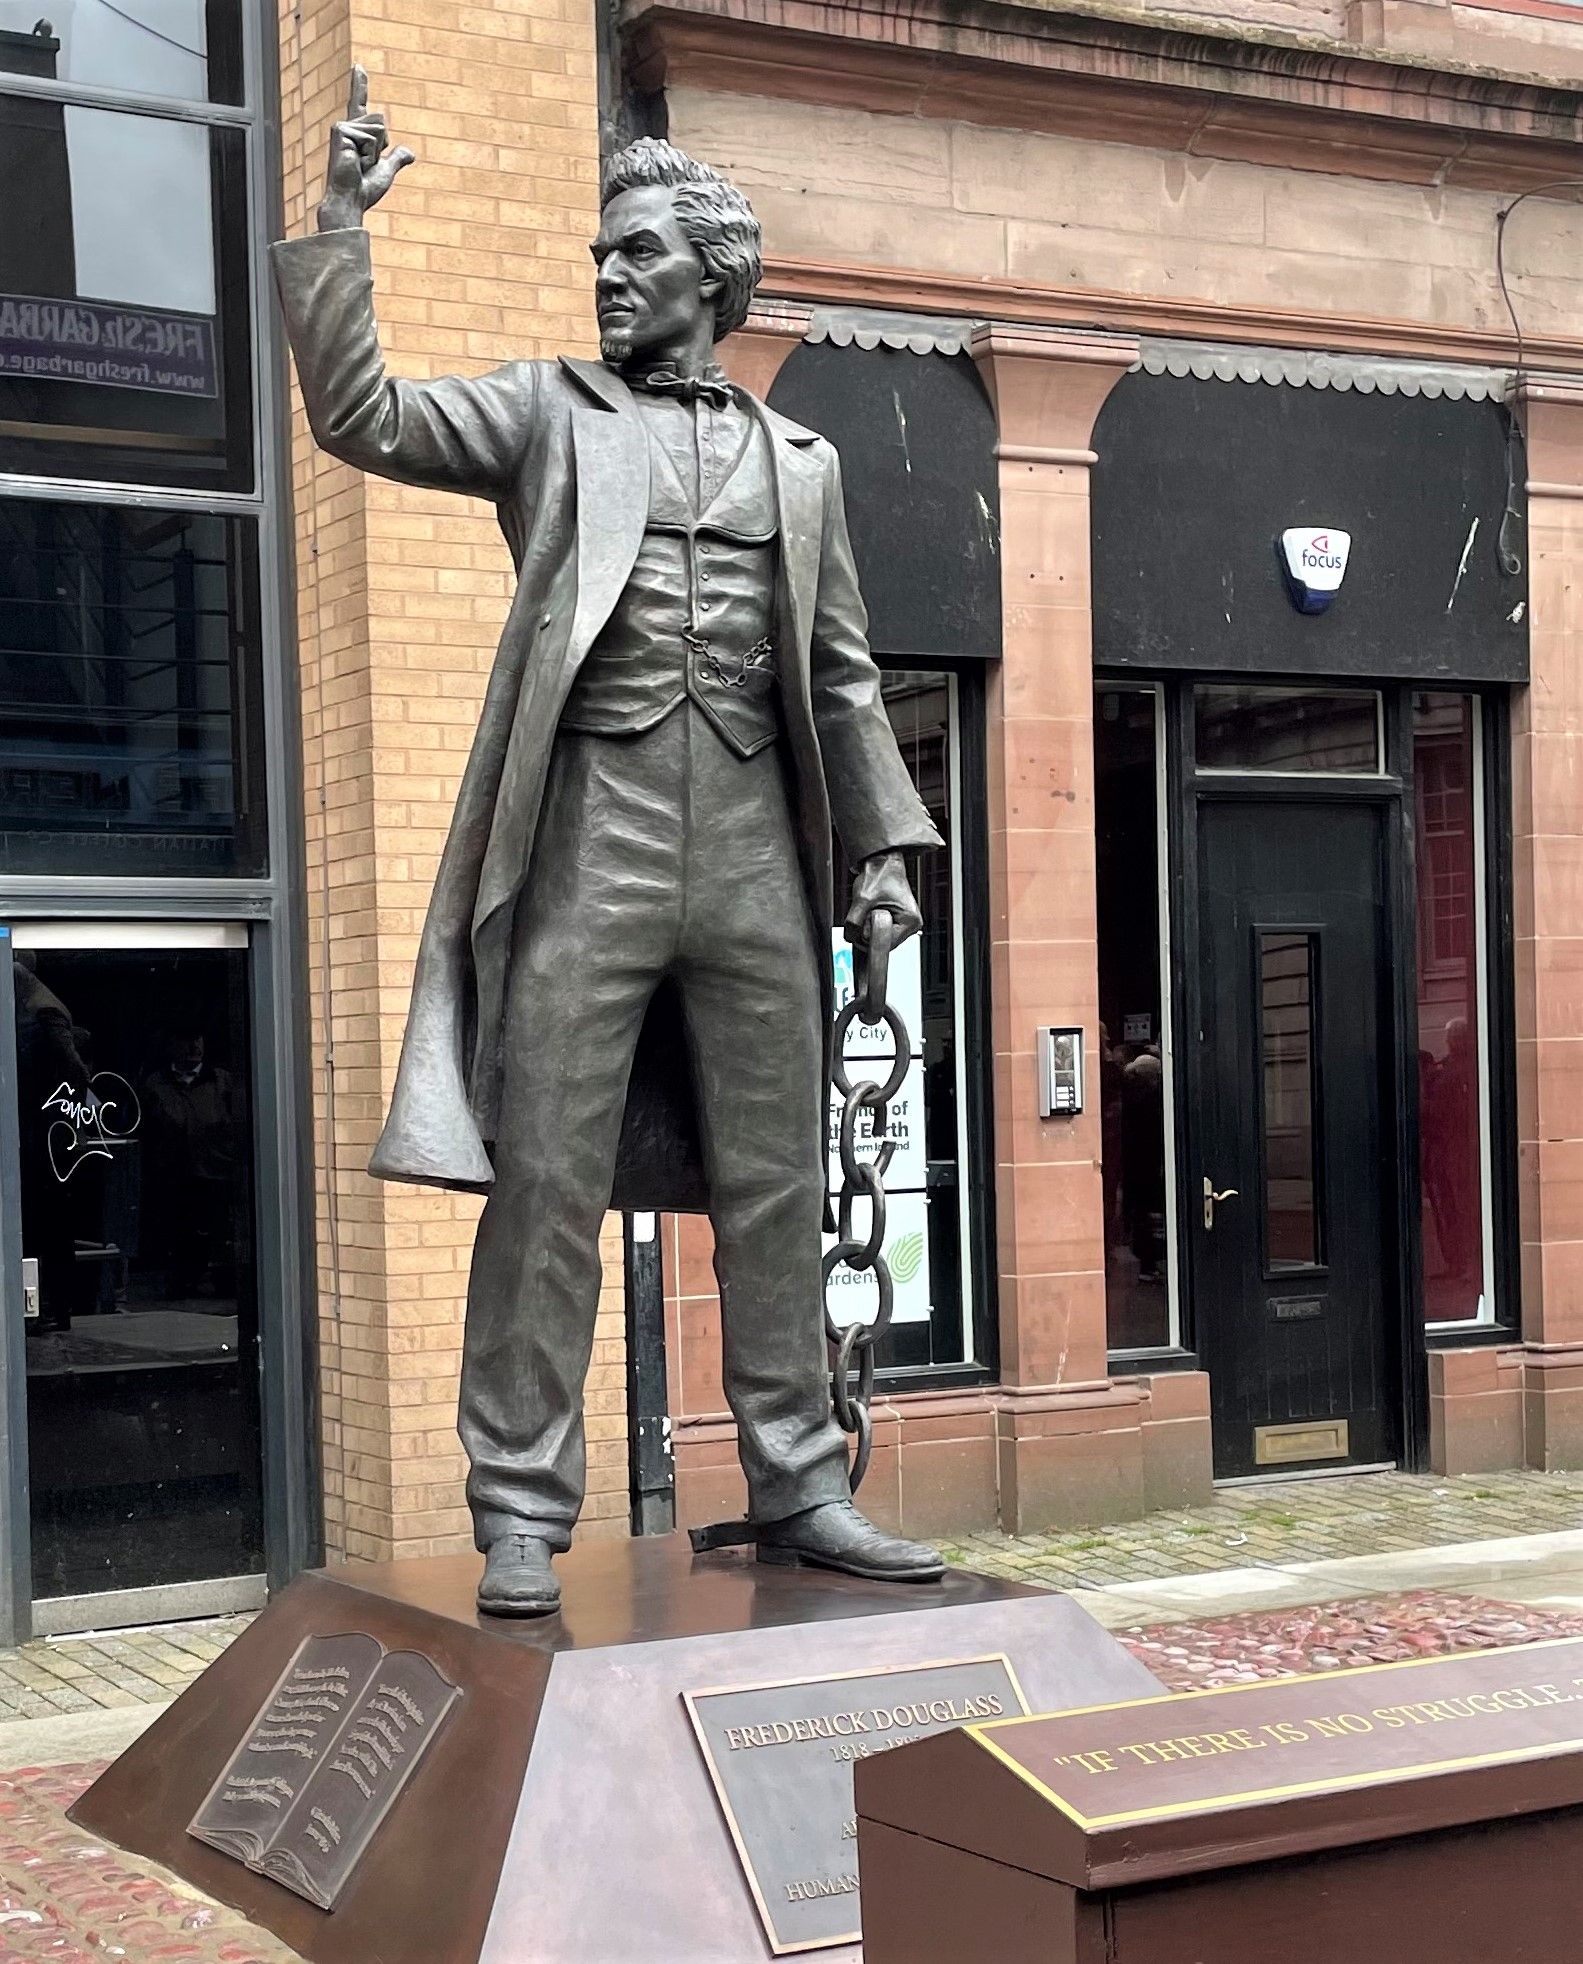 MONUMENT TO JUSTICE: The new statue of Frederick Douglass in Belfast city centre